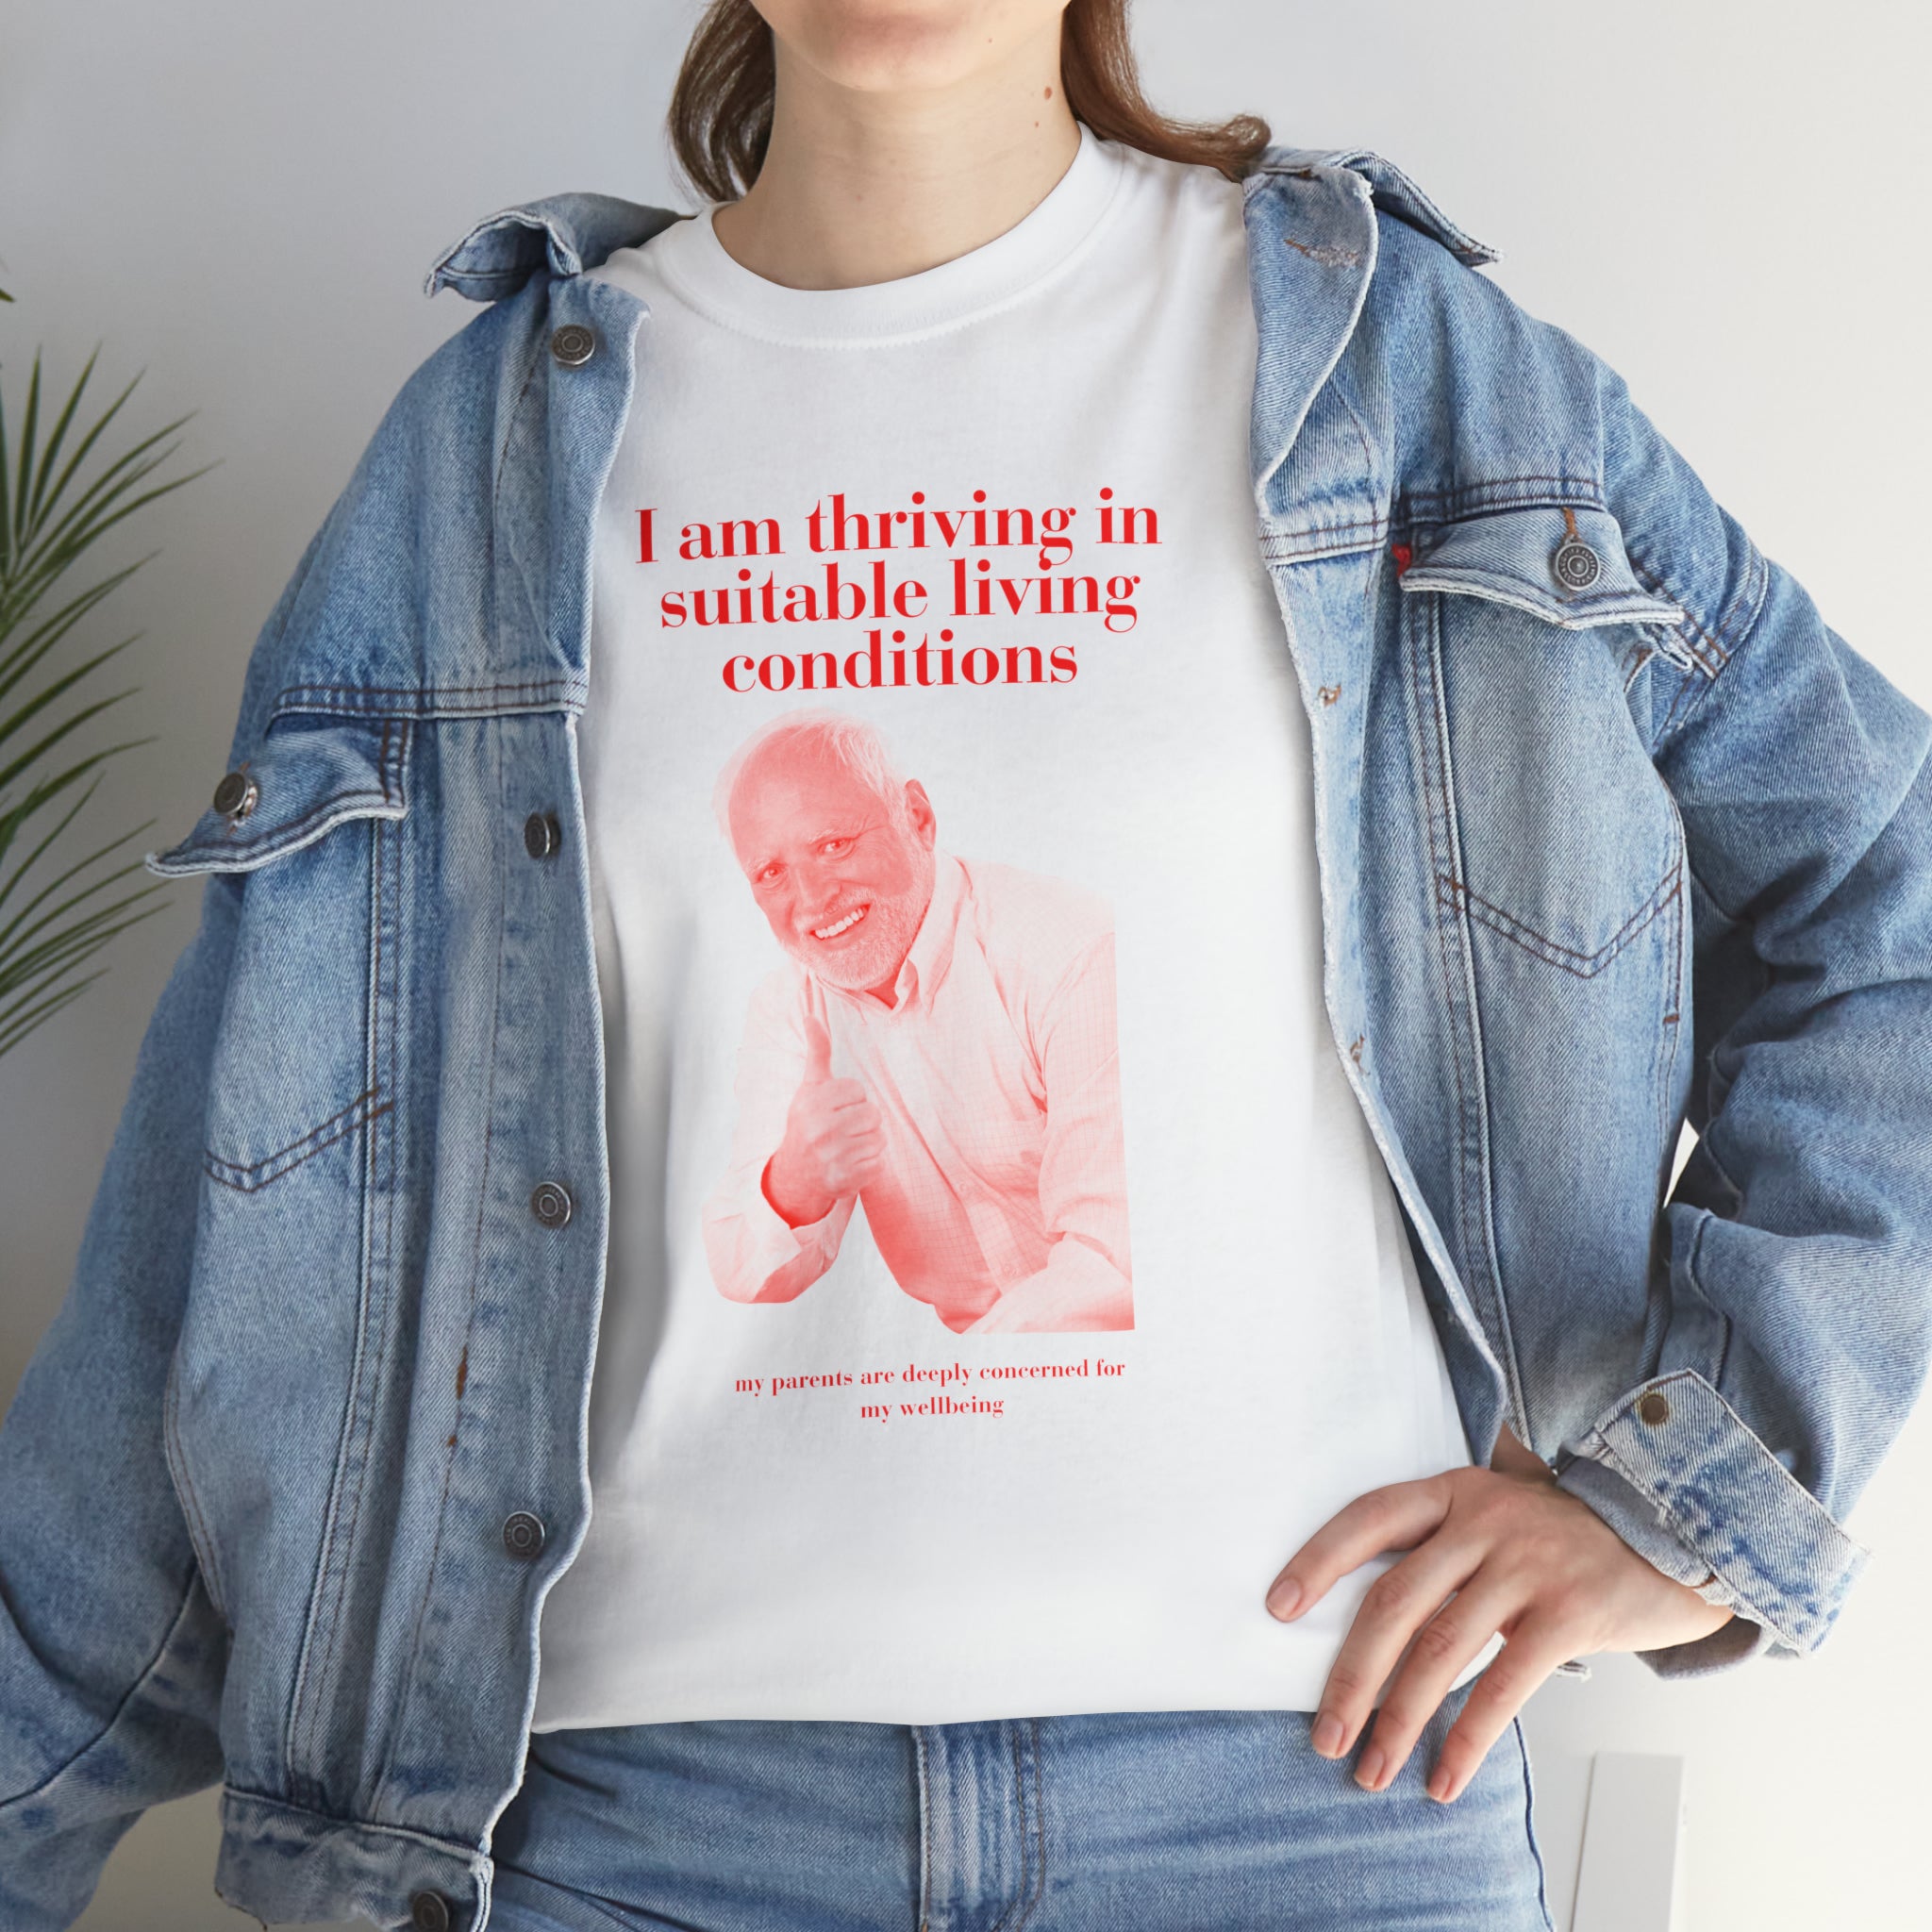 I am thriving in suitable living conditions  - Unisex Heavy Cotton Tee